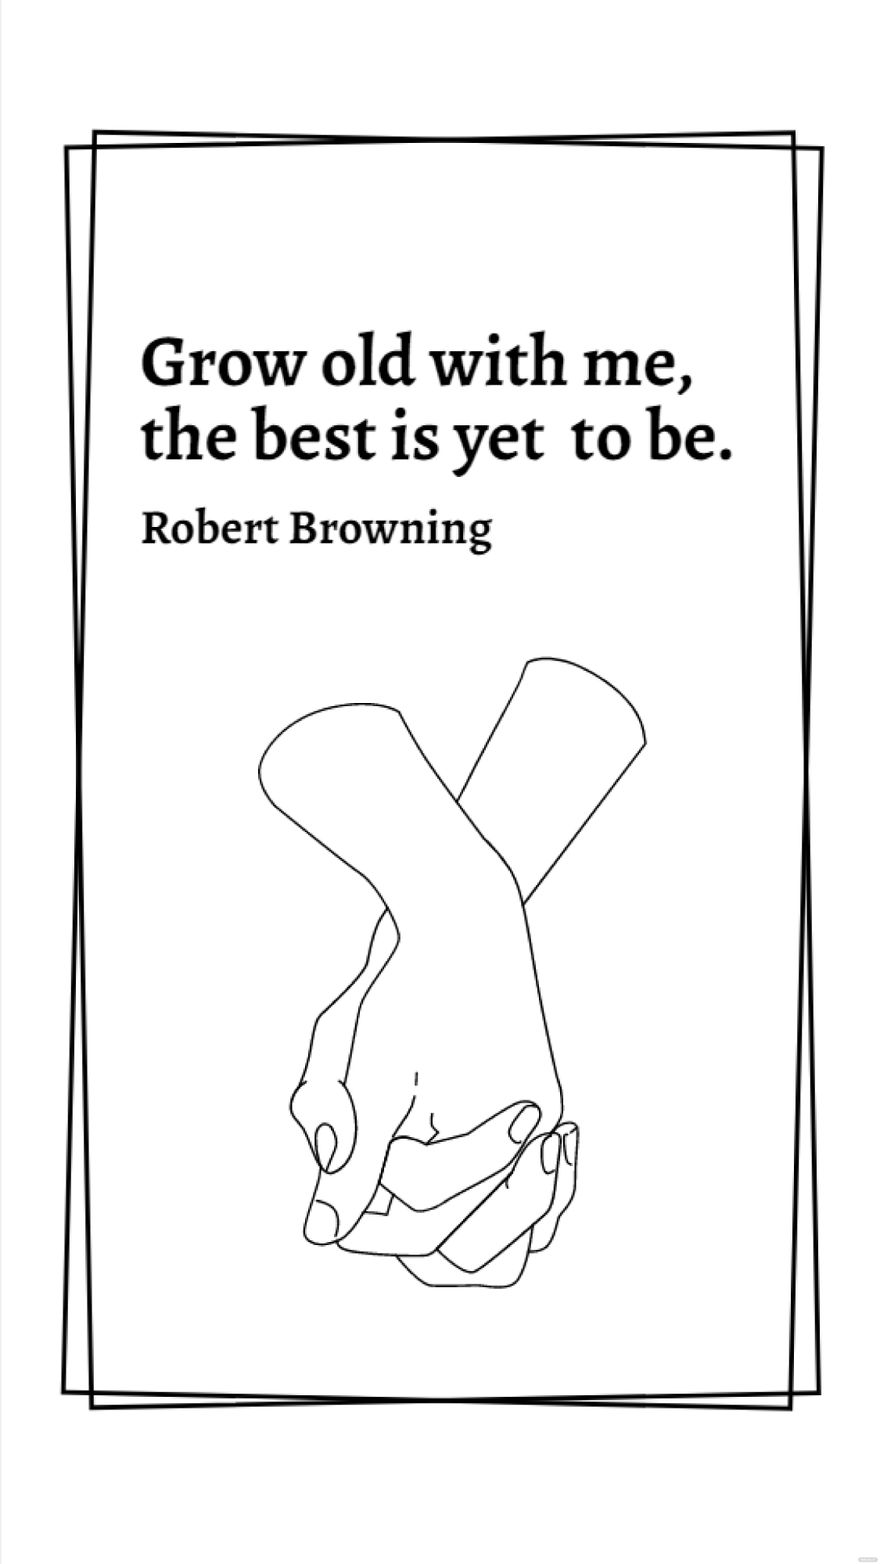 Free Robert Browning - Grow old with me, the best is yet to be. in JPG